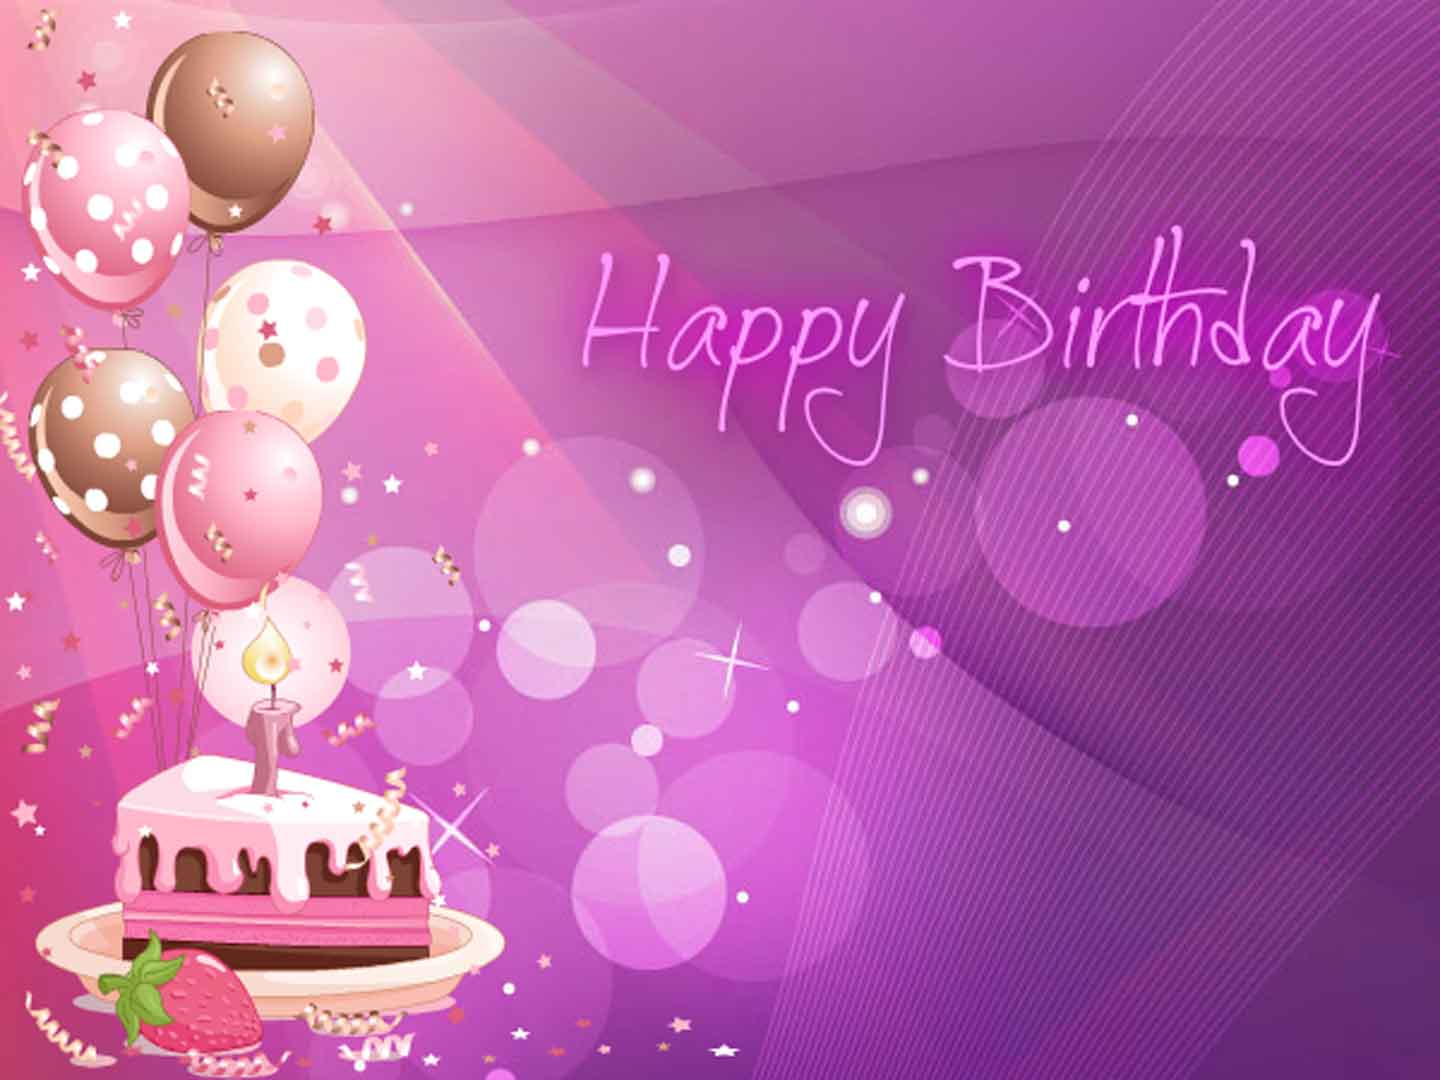 Wallpapers Happy Birthday Cake - Wallpaper Cave